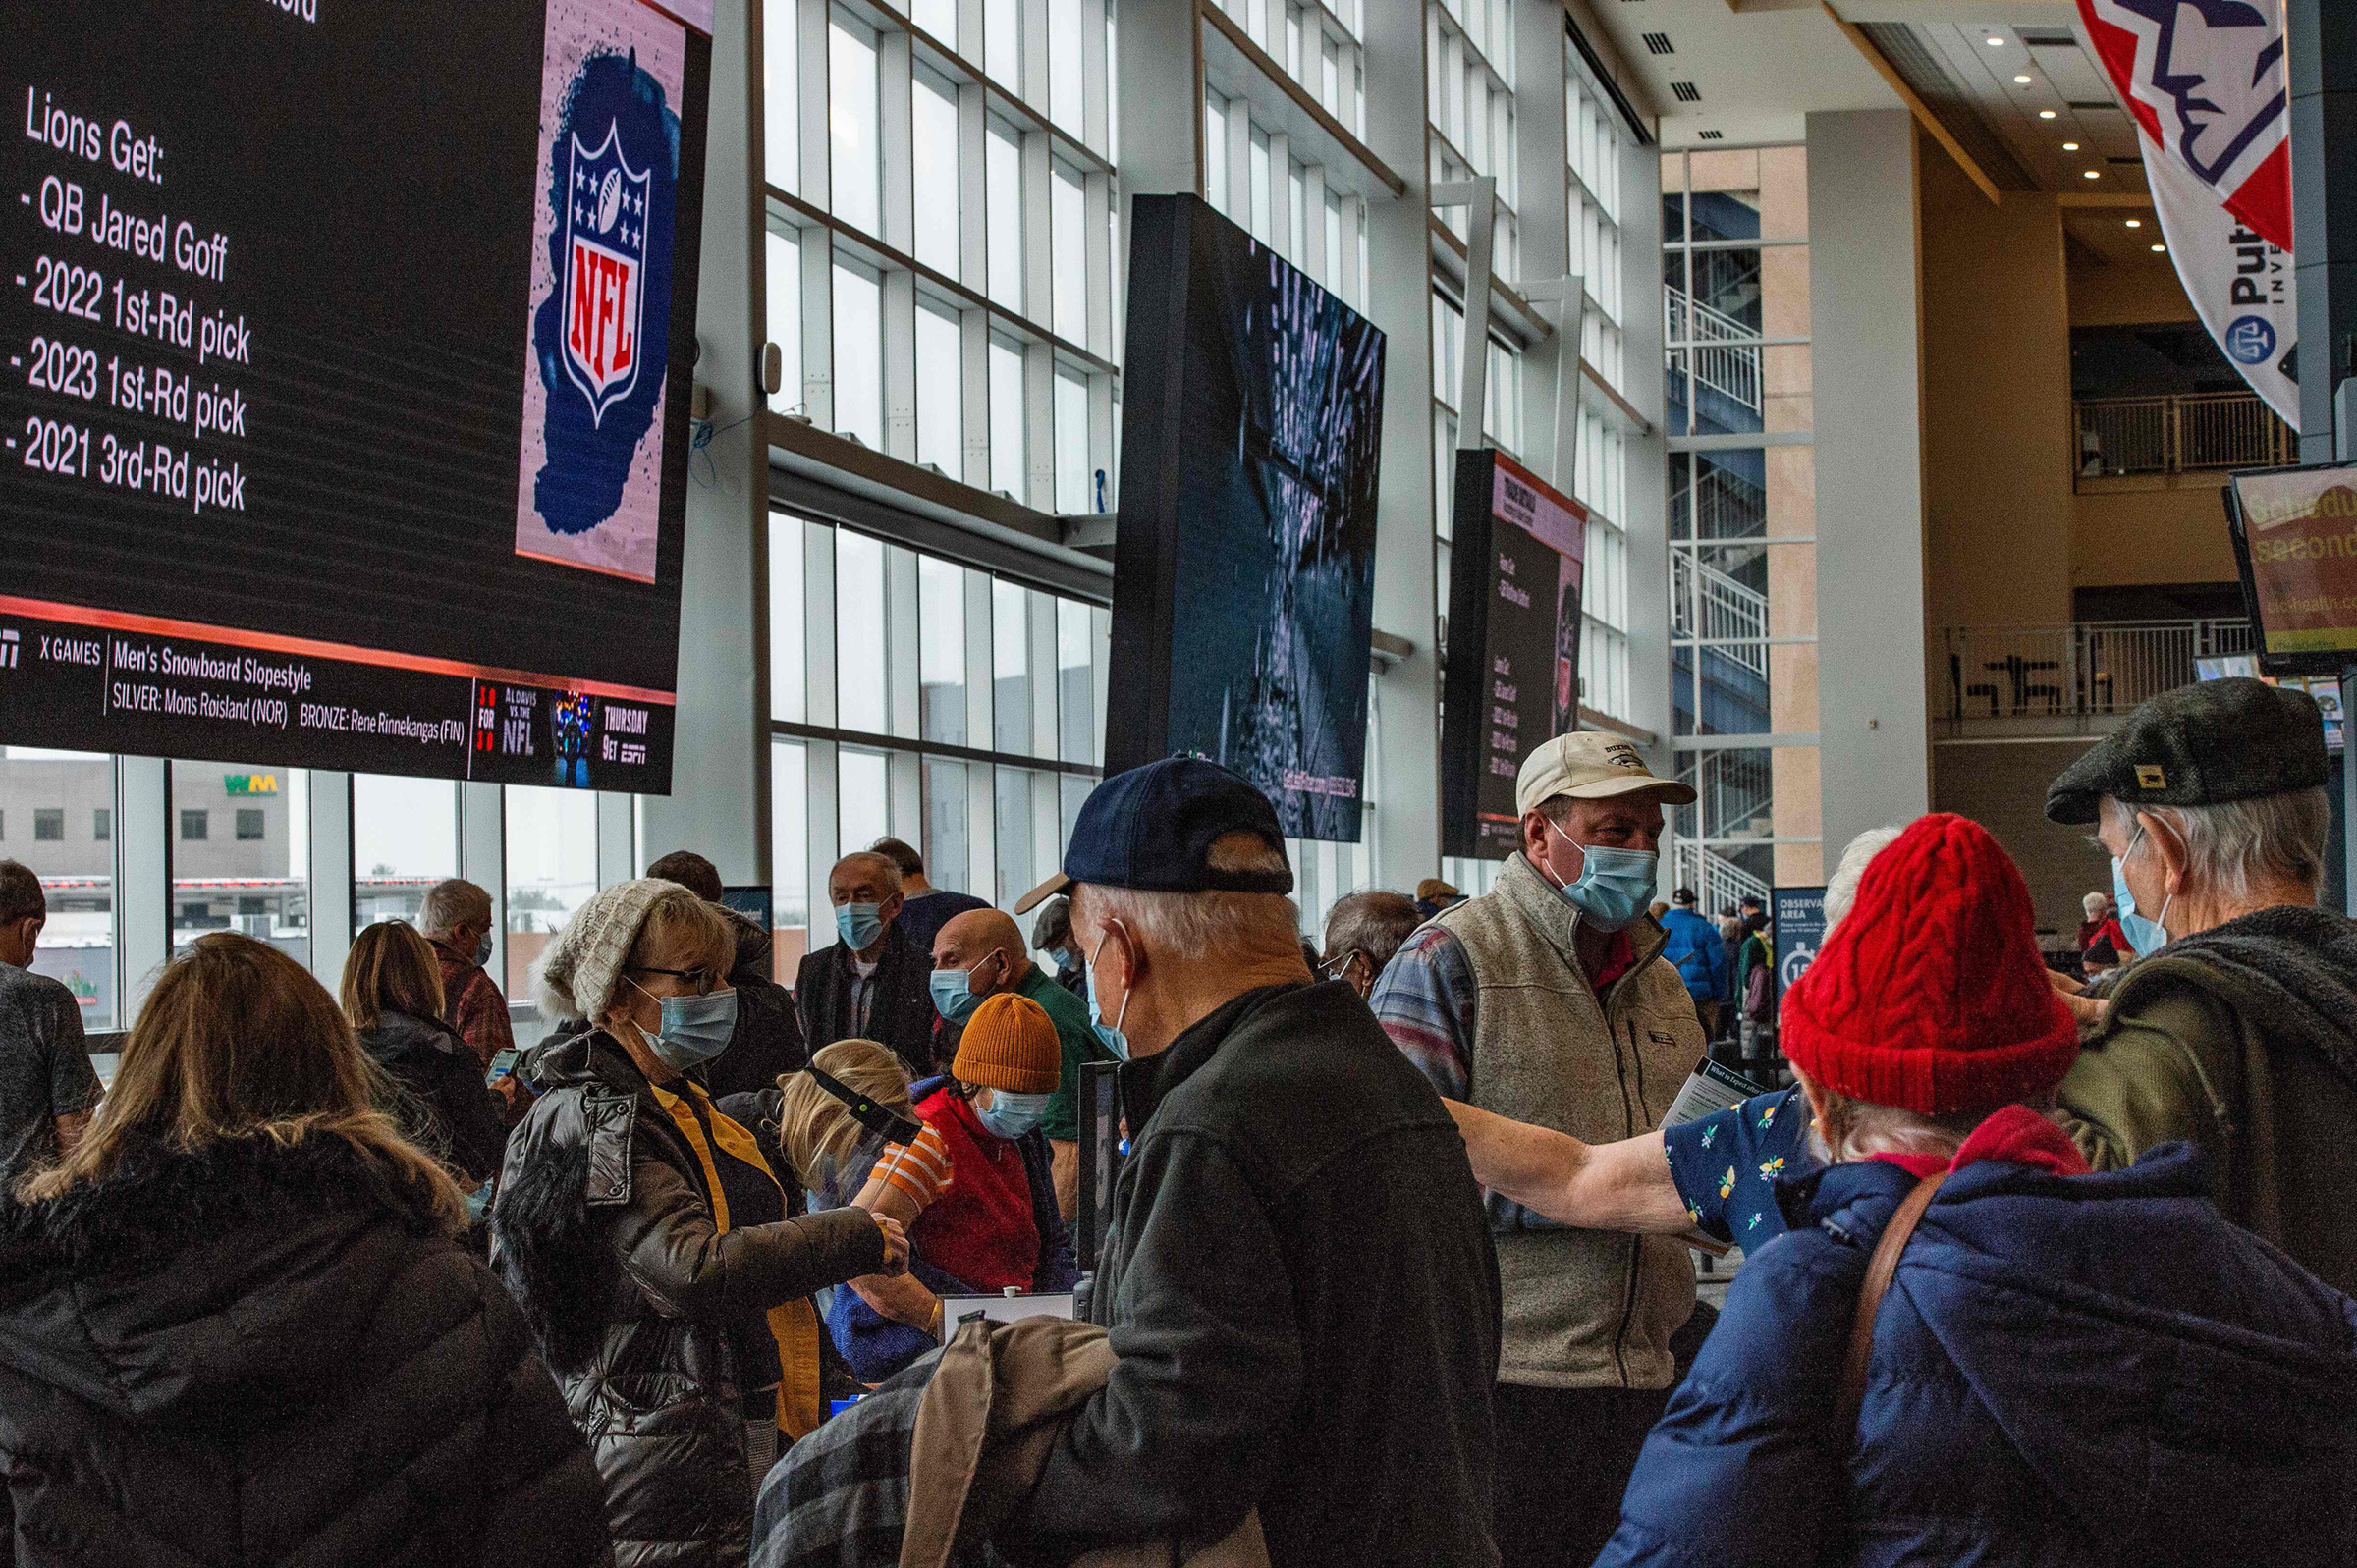 Hundreds of people move through Gillette Stadium in Foxborough, Mass., as they receive their COVID-19 vaccine on Feb. 1, 2021. (Joseph Prezioso—AFP/Getty Images)